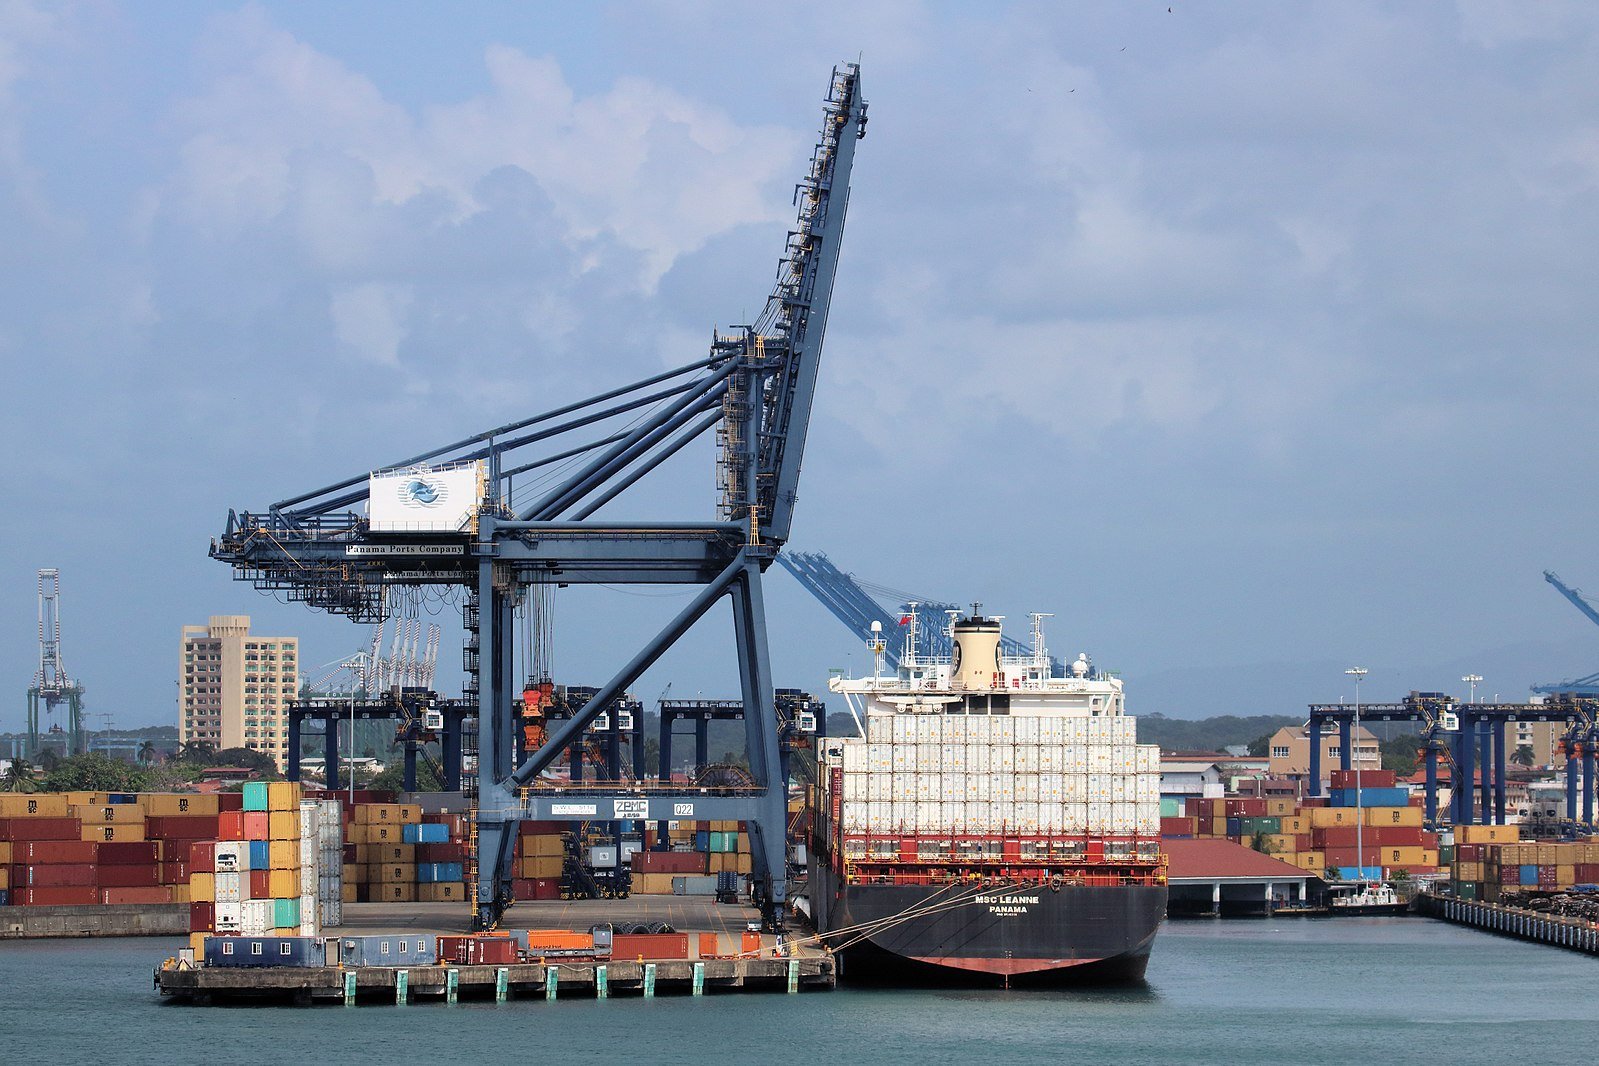 A gantry crane services containers on the container ship MSC Leanne at a port in Panama. Source: ImagePerson/ CC BY-SA 4.0